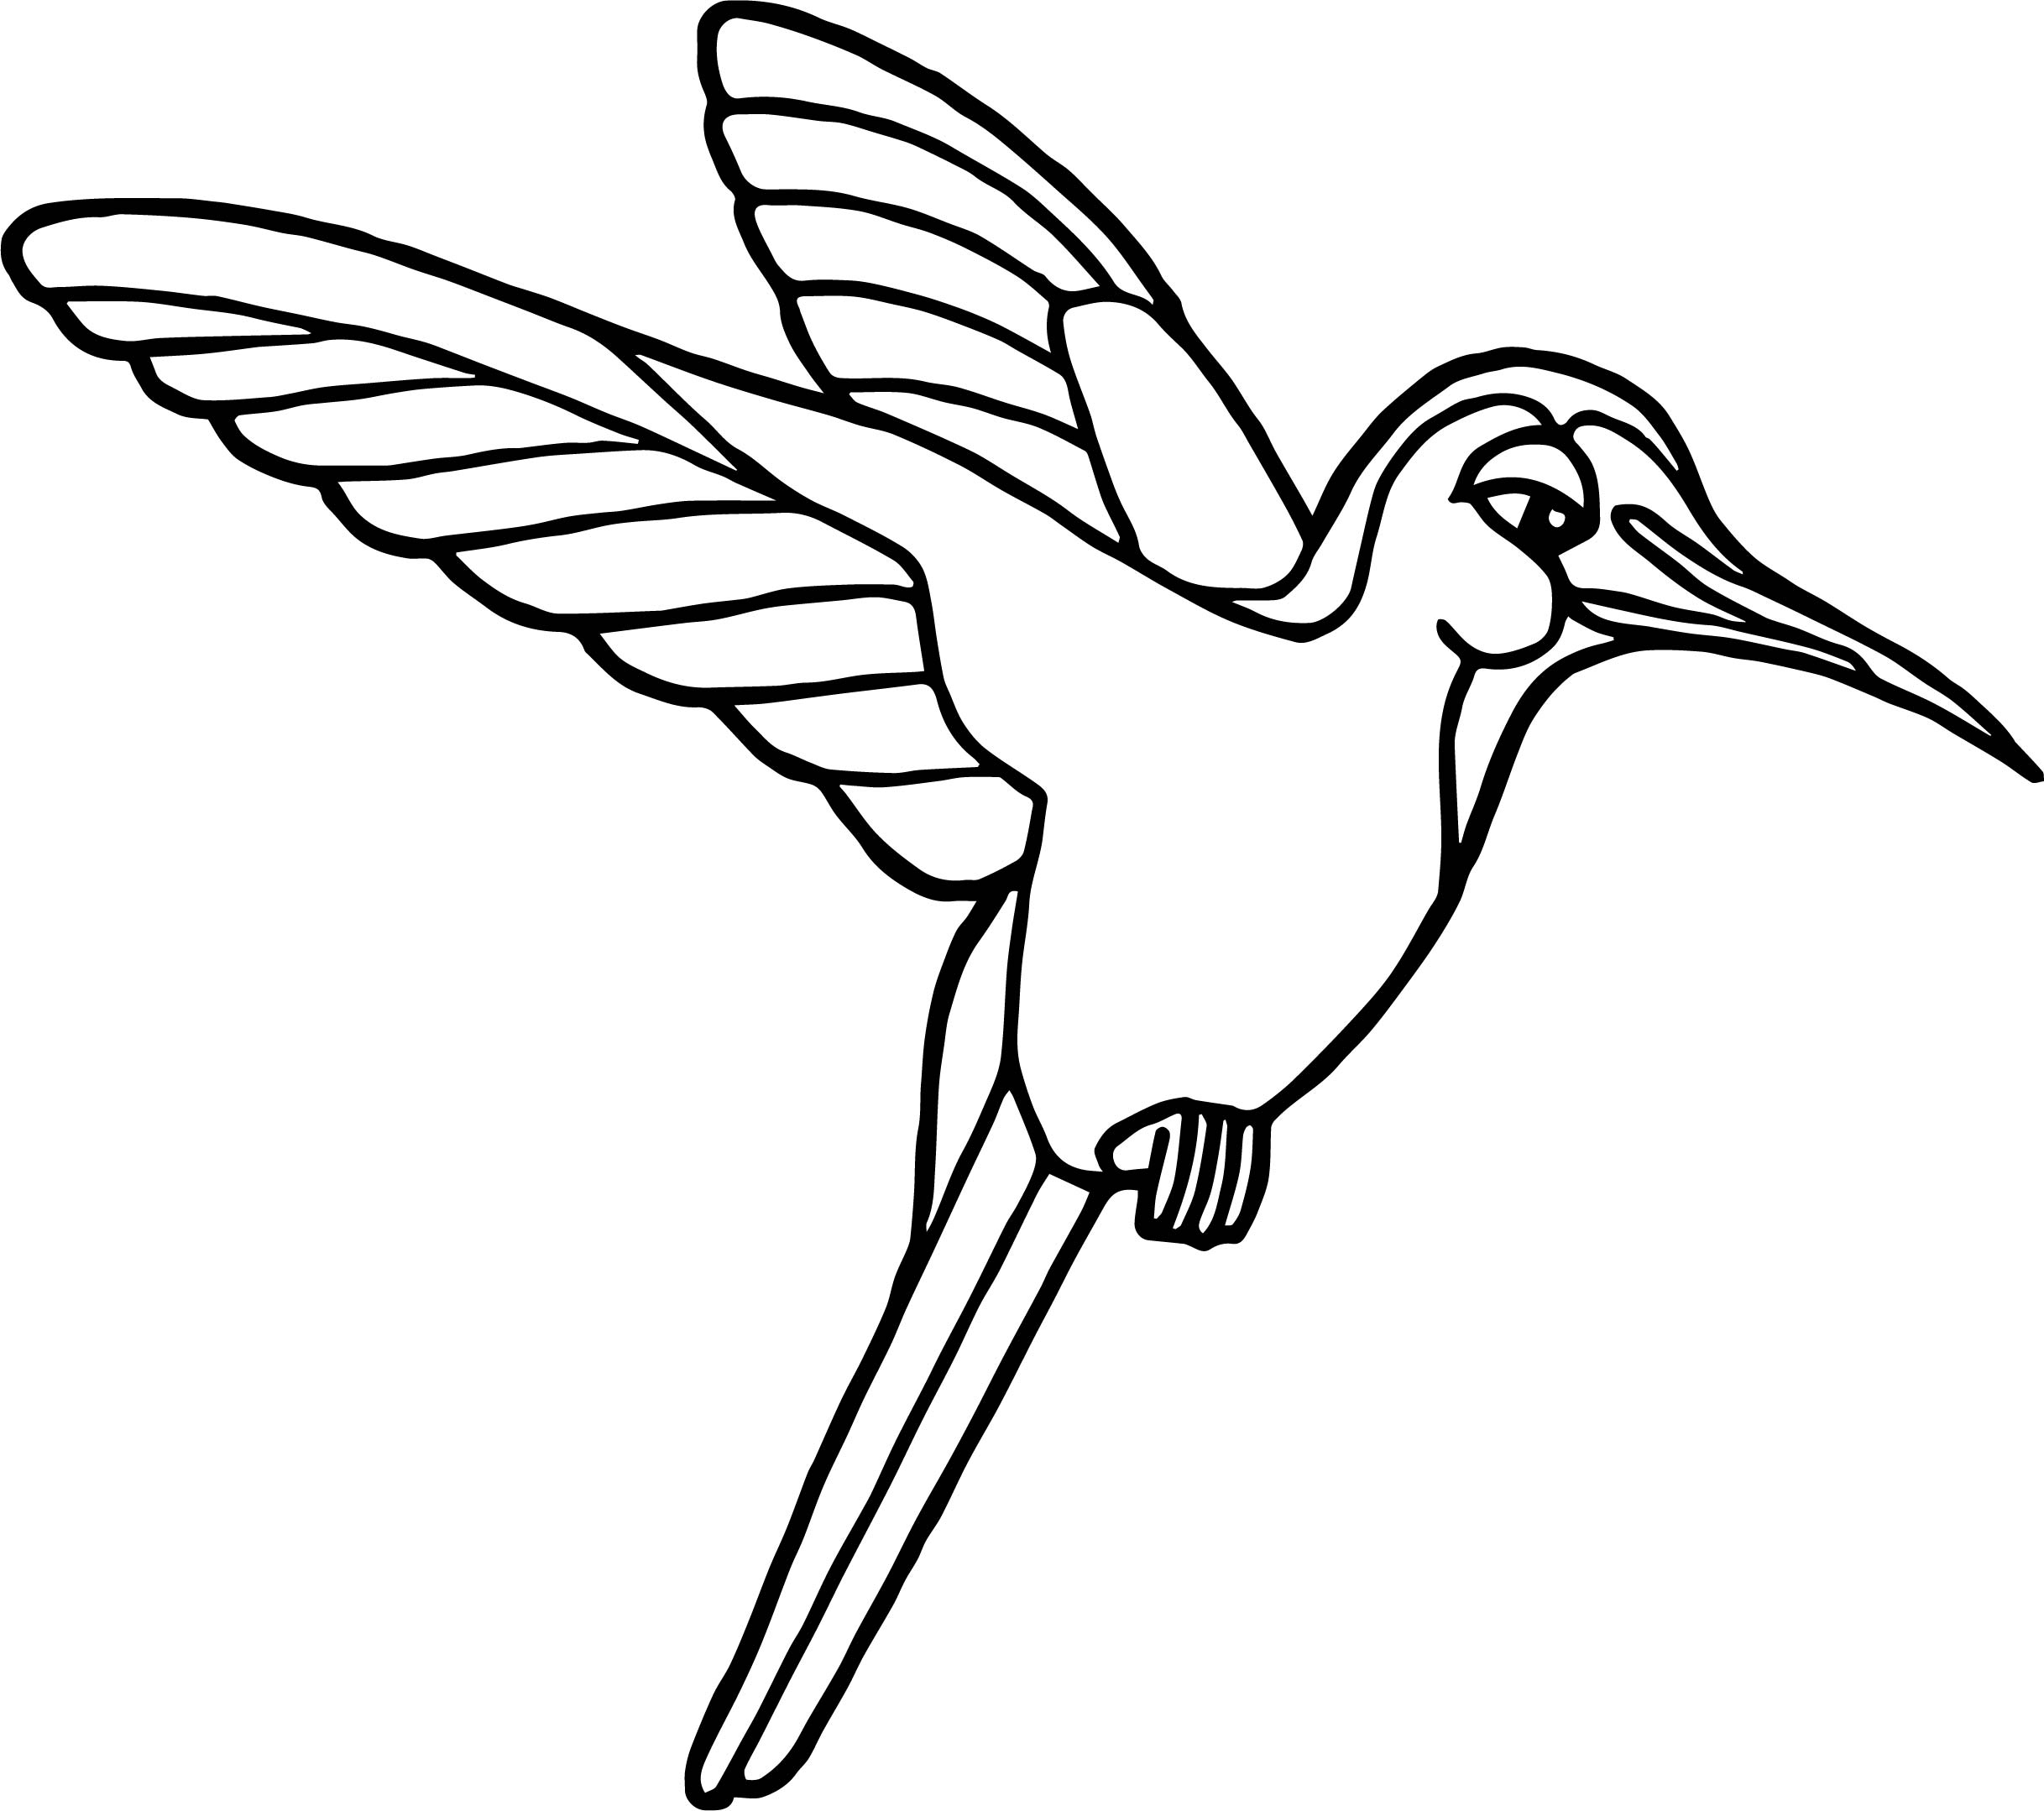 Rainforest Frog Coloring Page Rainforest Hummingbird Coloring Page Wecoloringpage